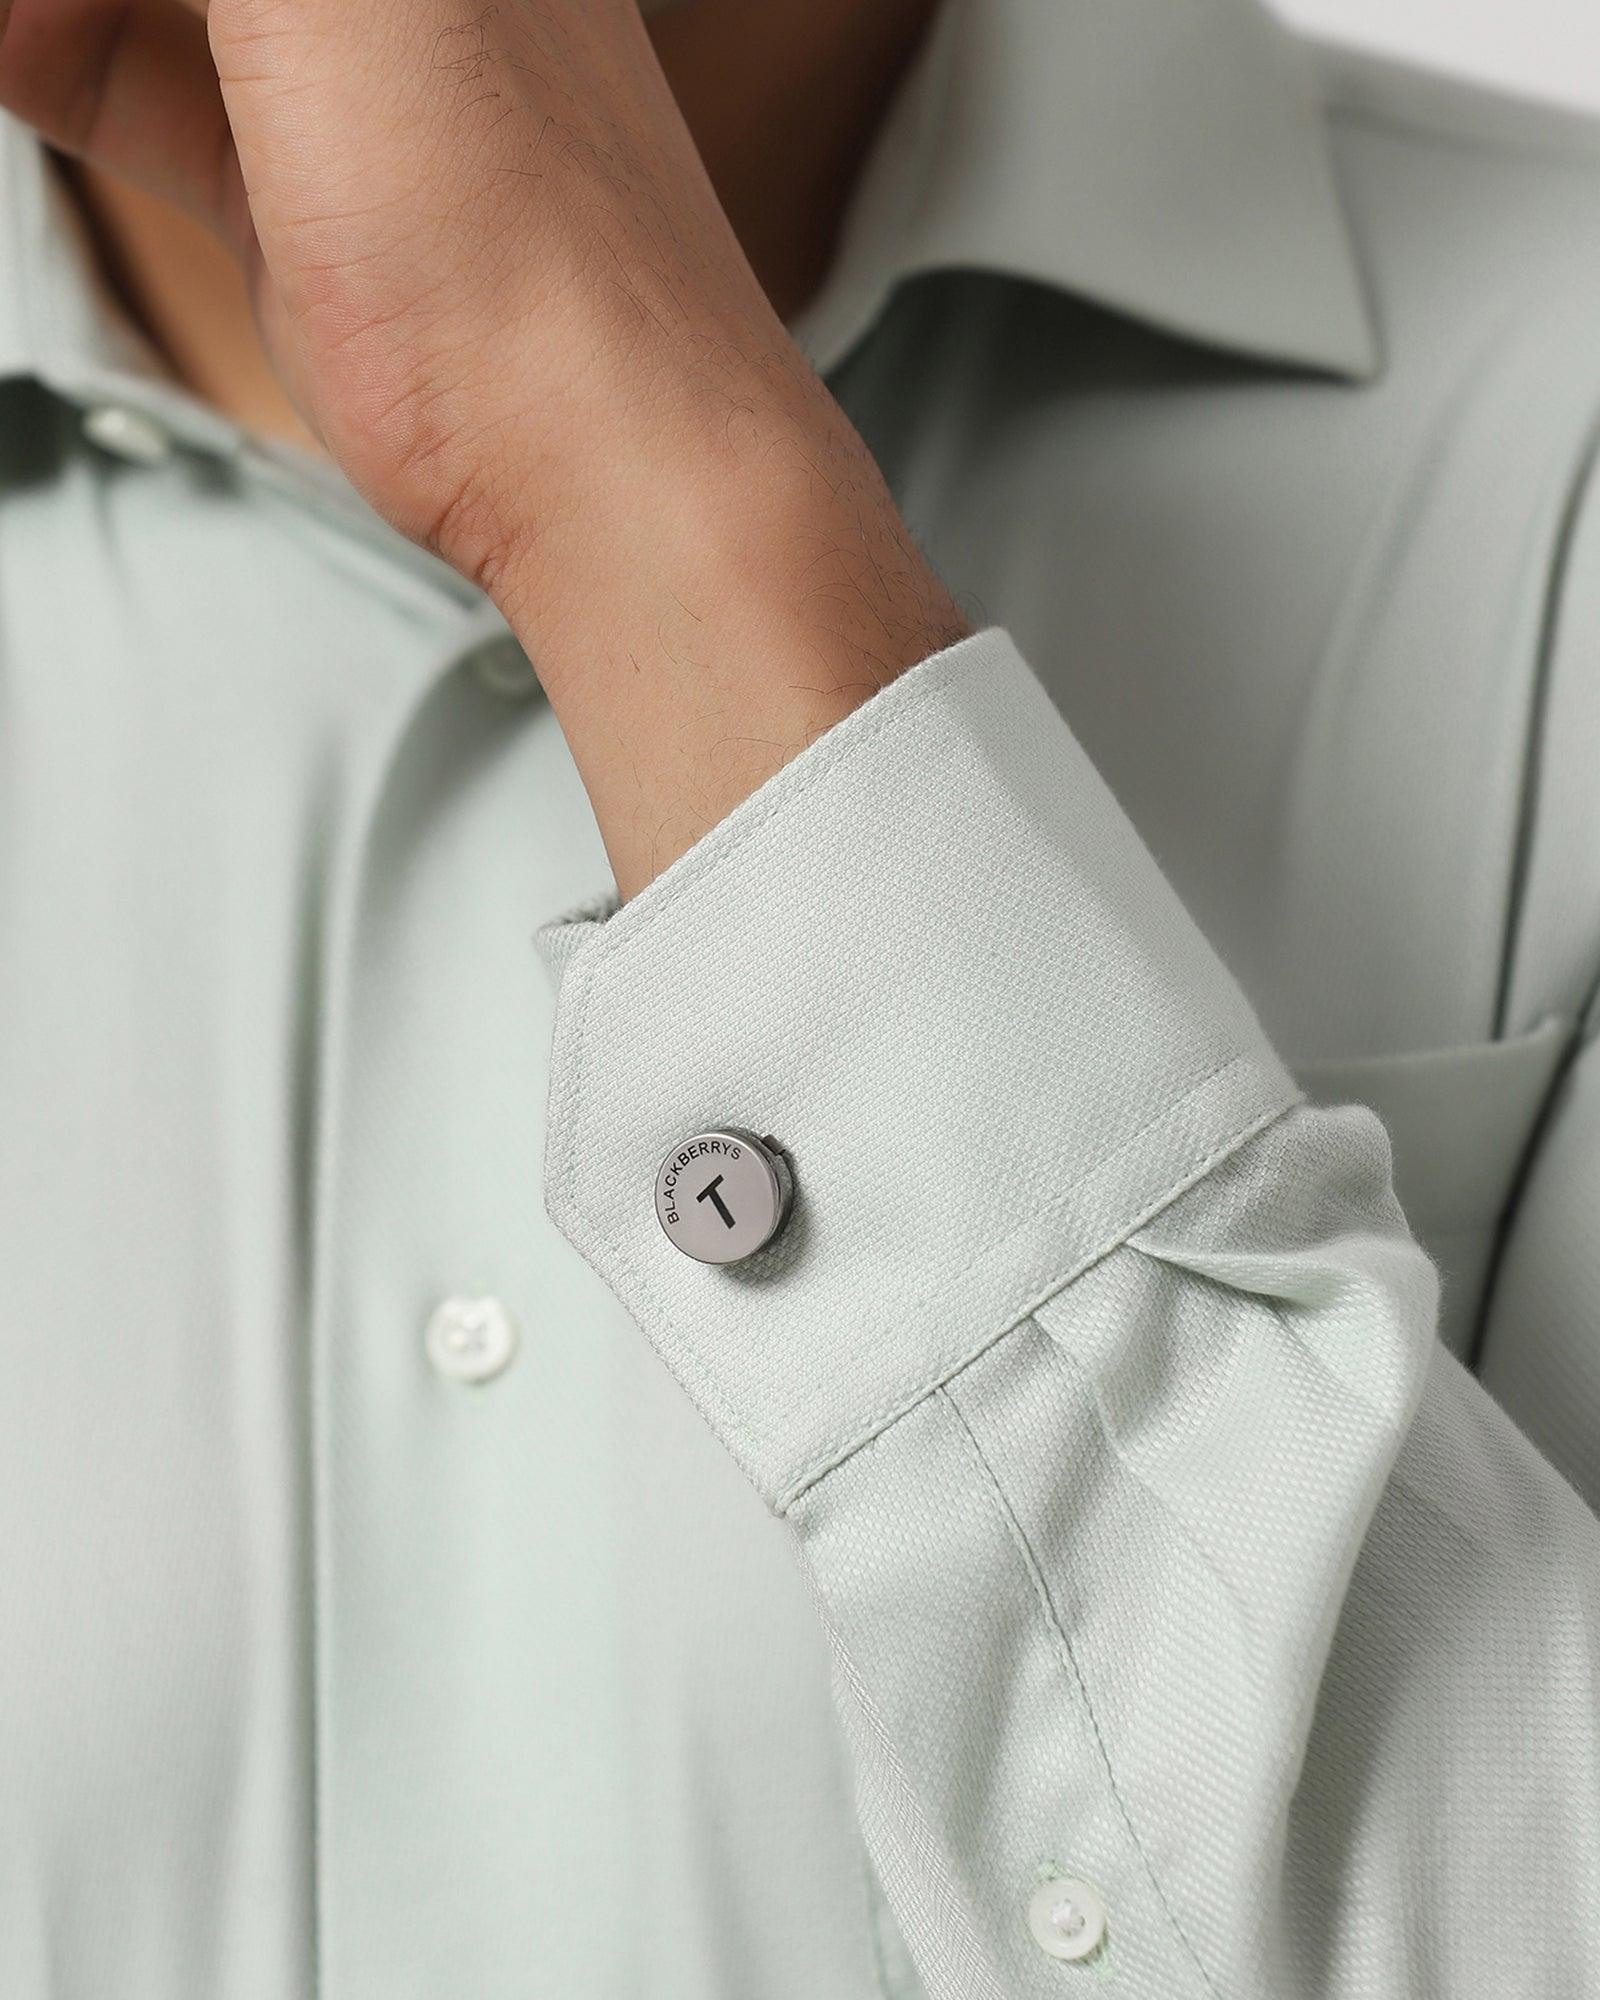 Personalised Shirt Button Cover With Alphabetic Initial-T